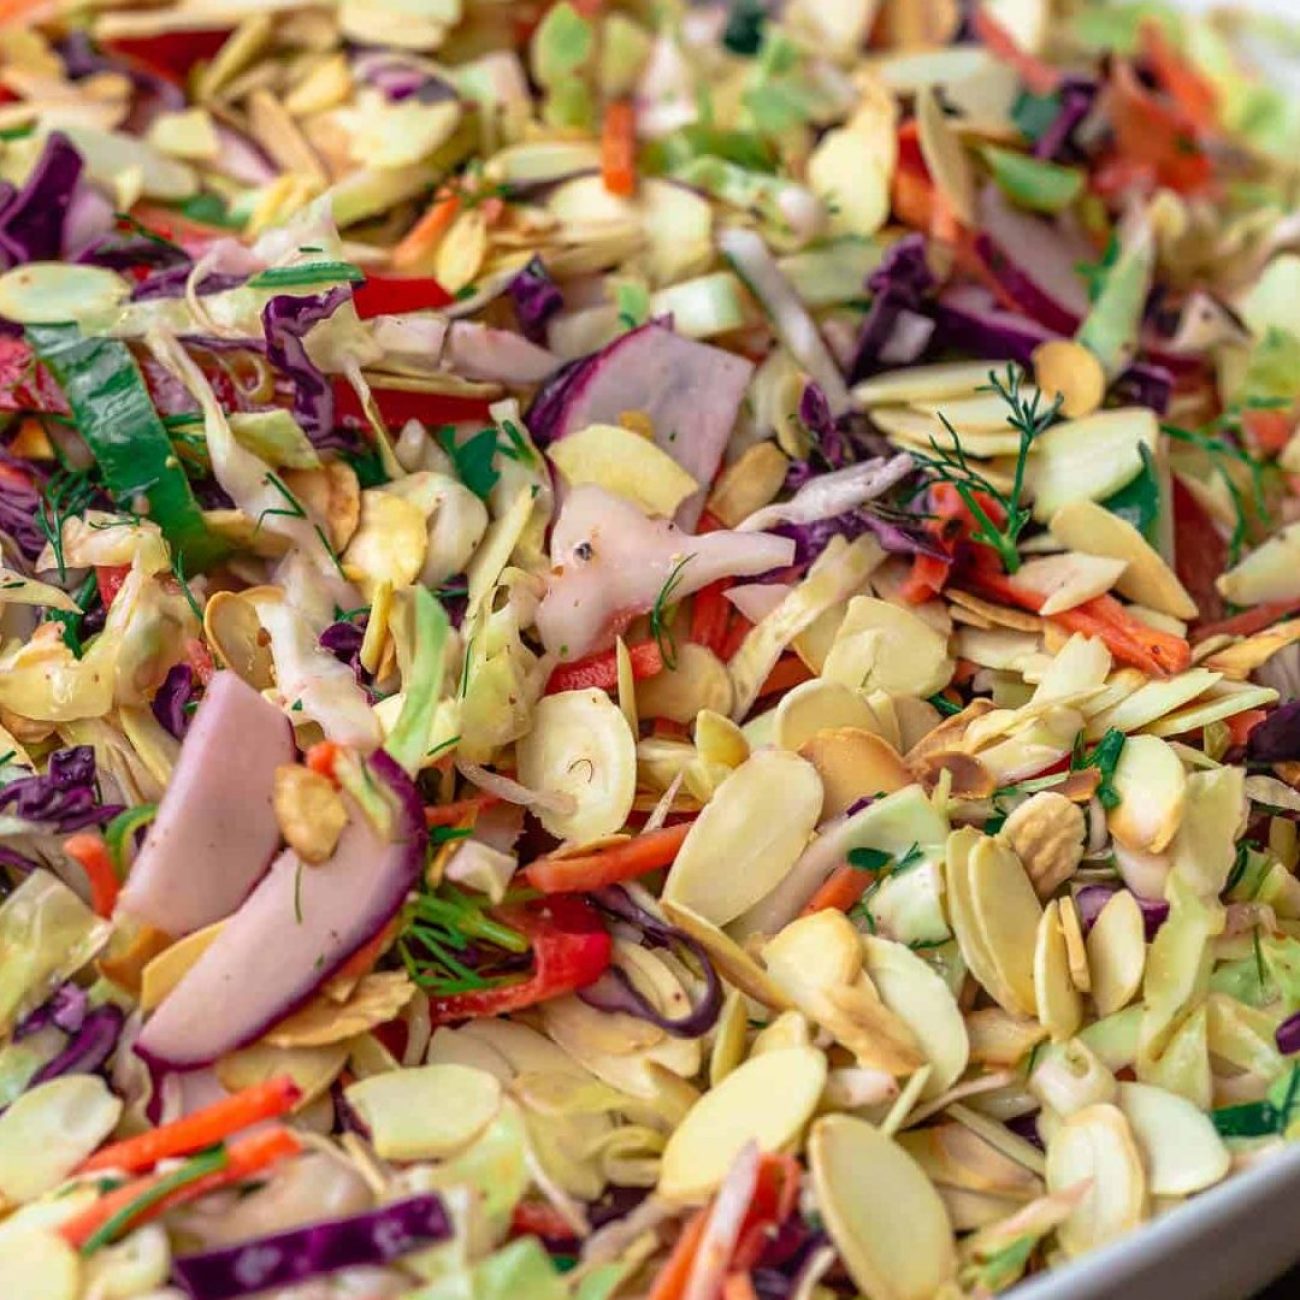 Low-Calorie Crunchy Coleslaw Recipe – Perfect for Weight Loss Goals